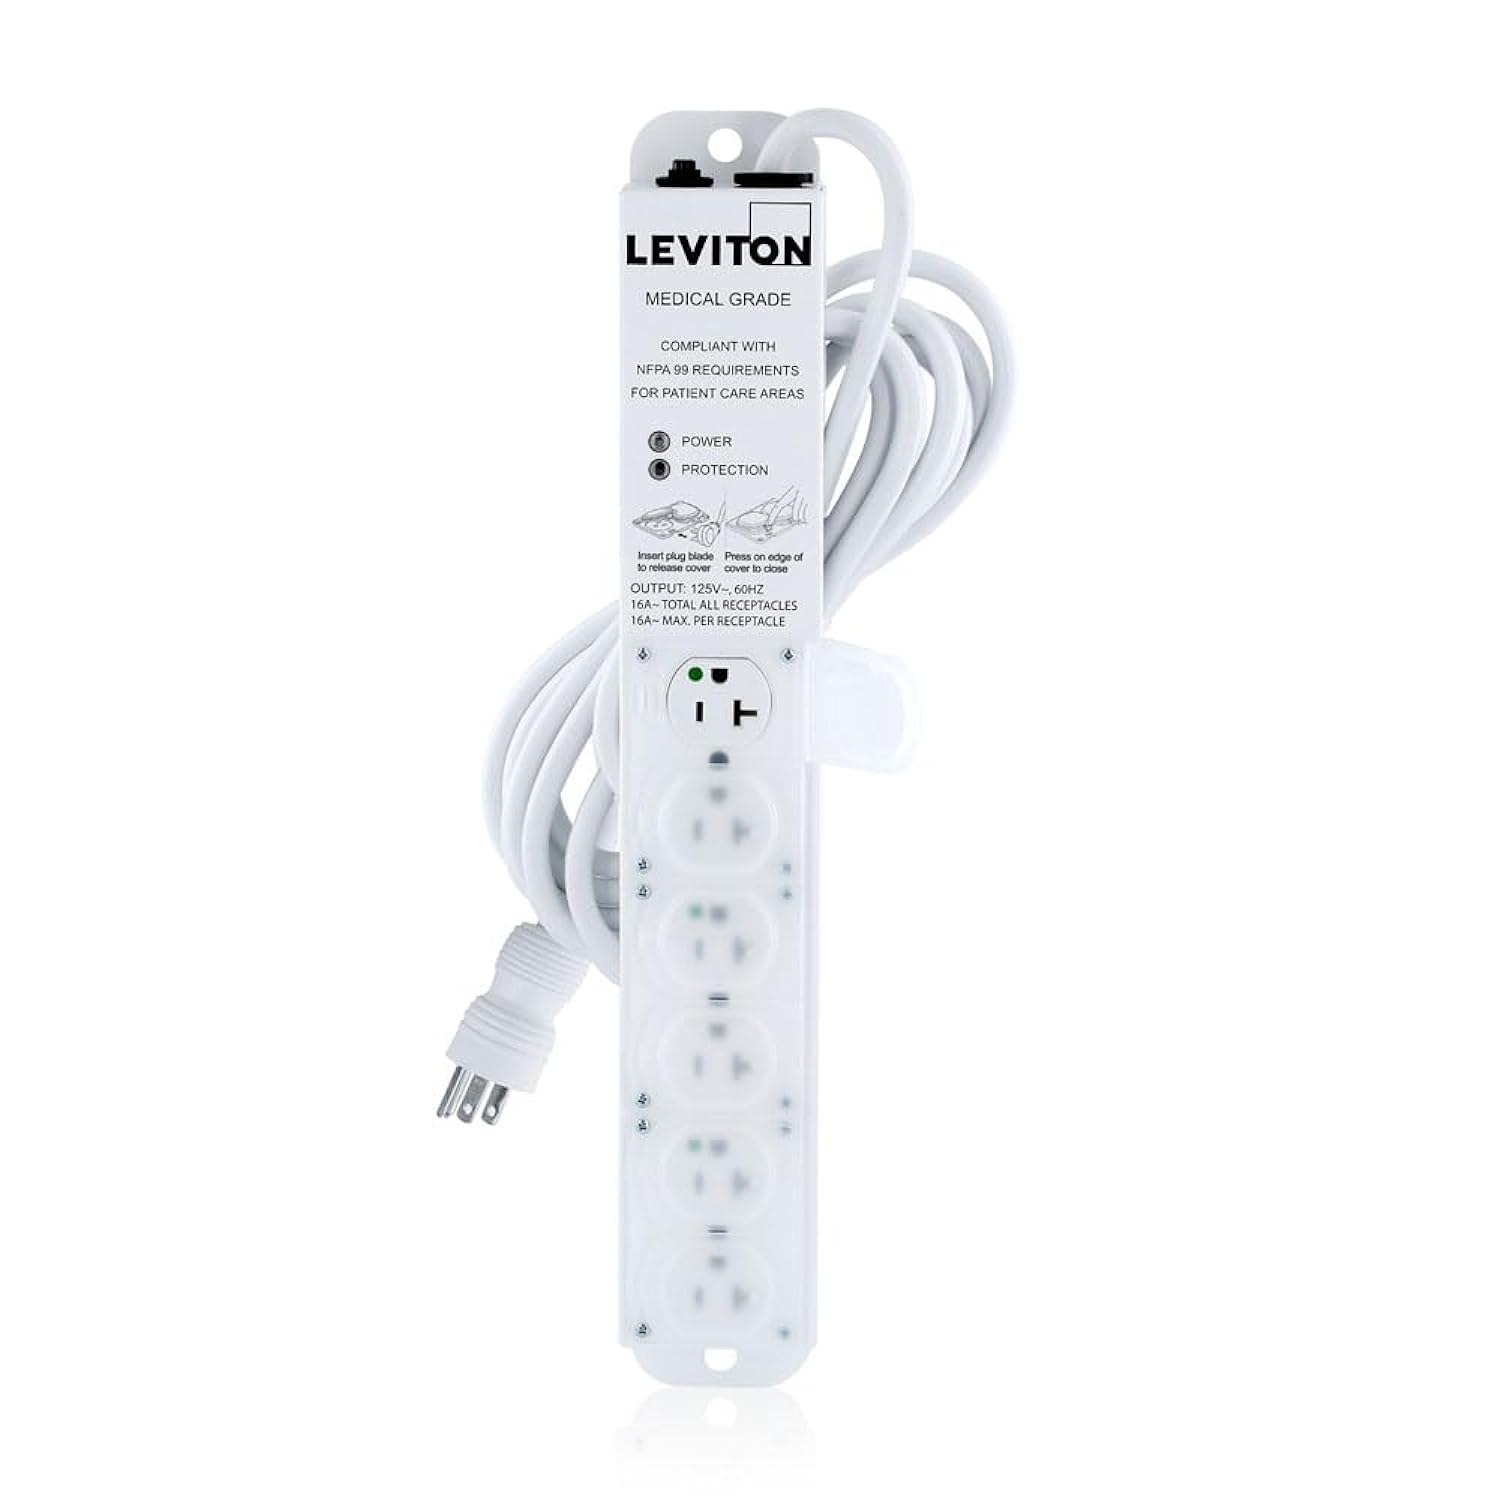 Leviton 5306M-2S5 20 Amp Medical Grade Power Strip, Surge Protected, 6-Outlet, 15' Cord, Image